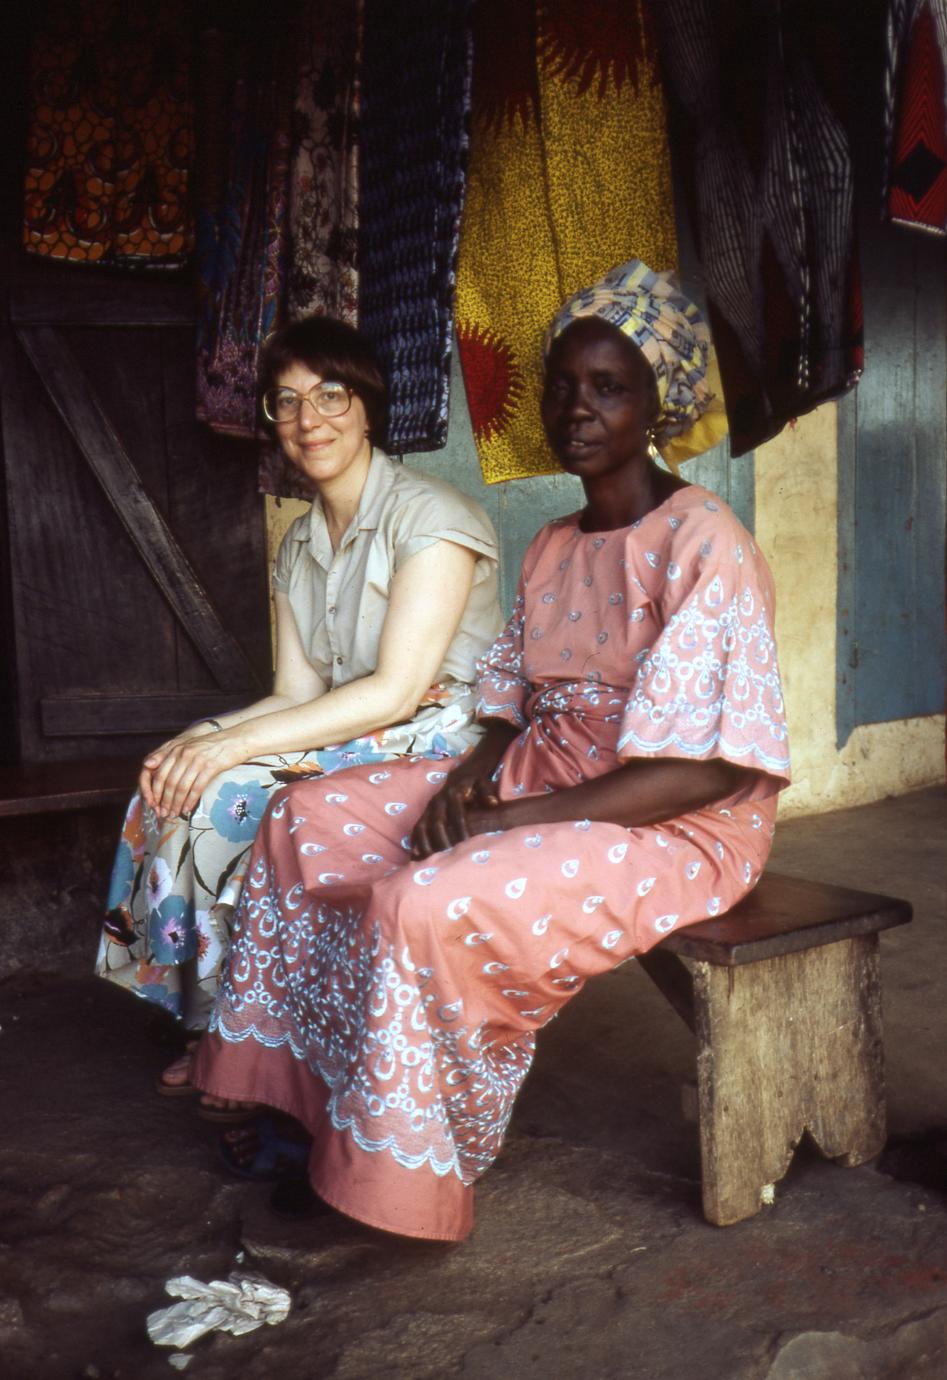 Trager and Mrs. Ajayi on a bench